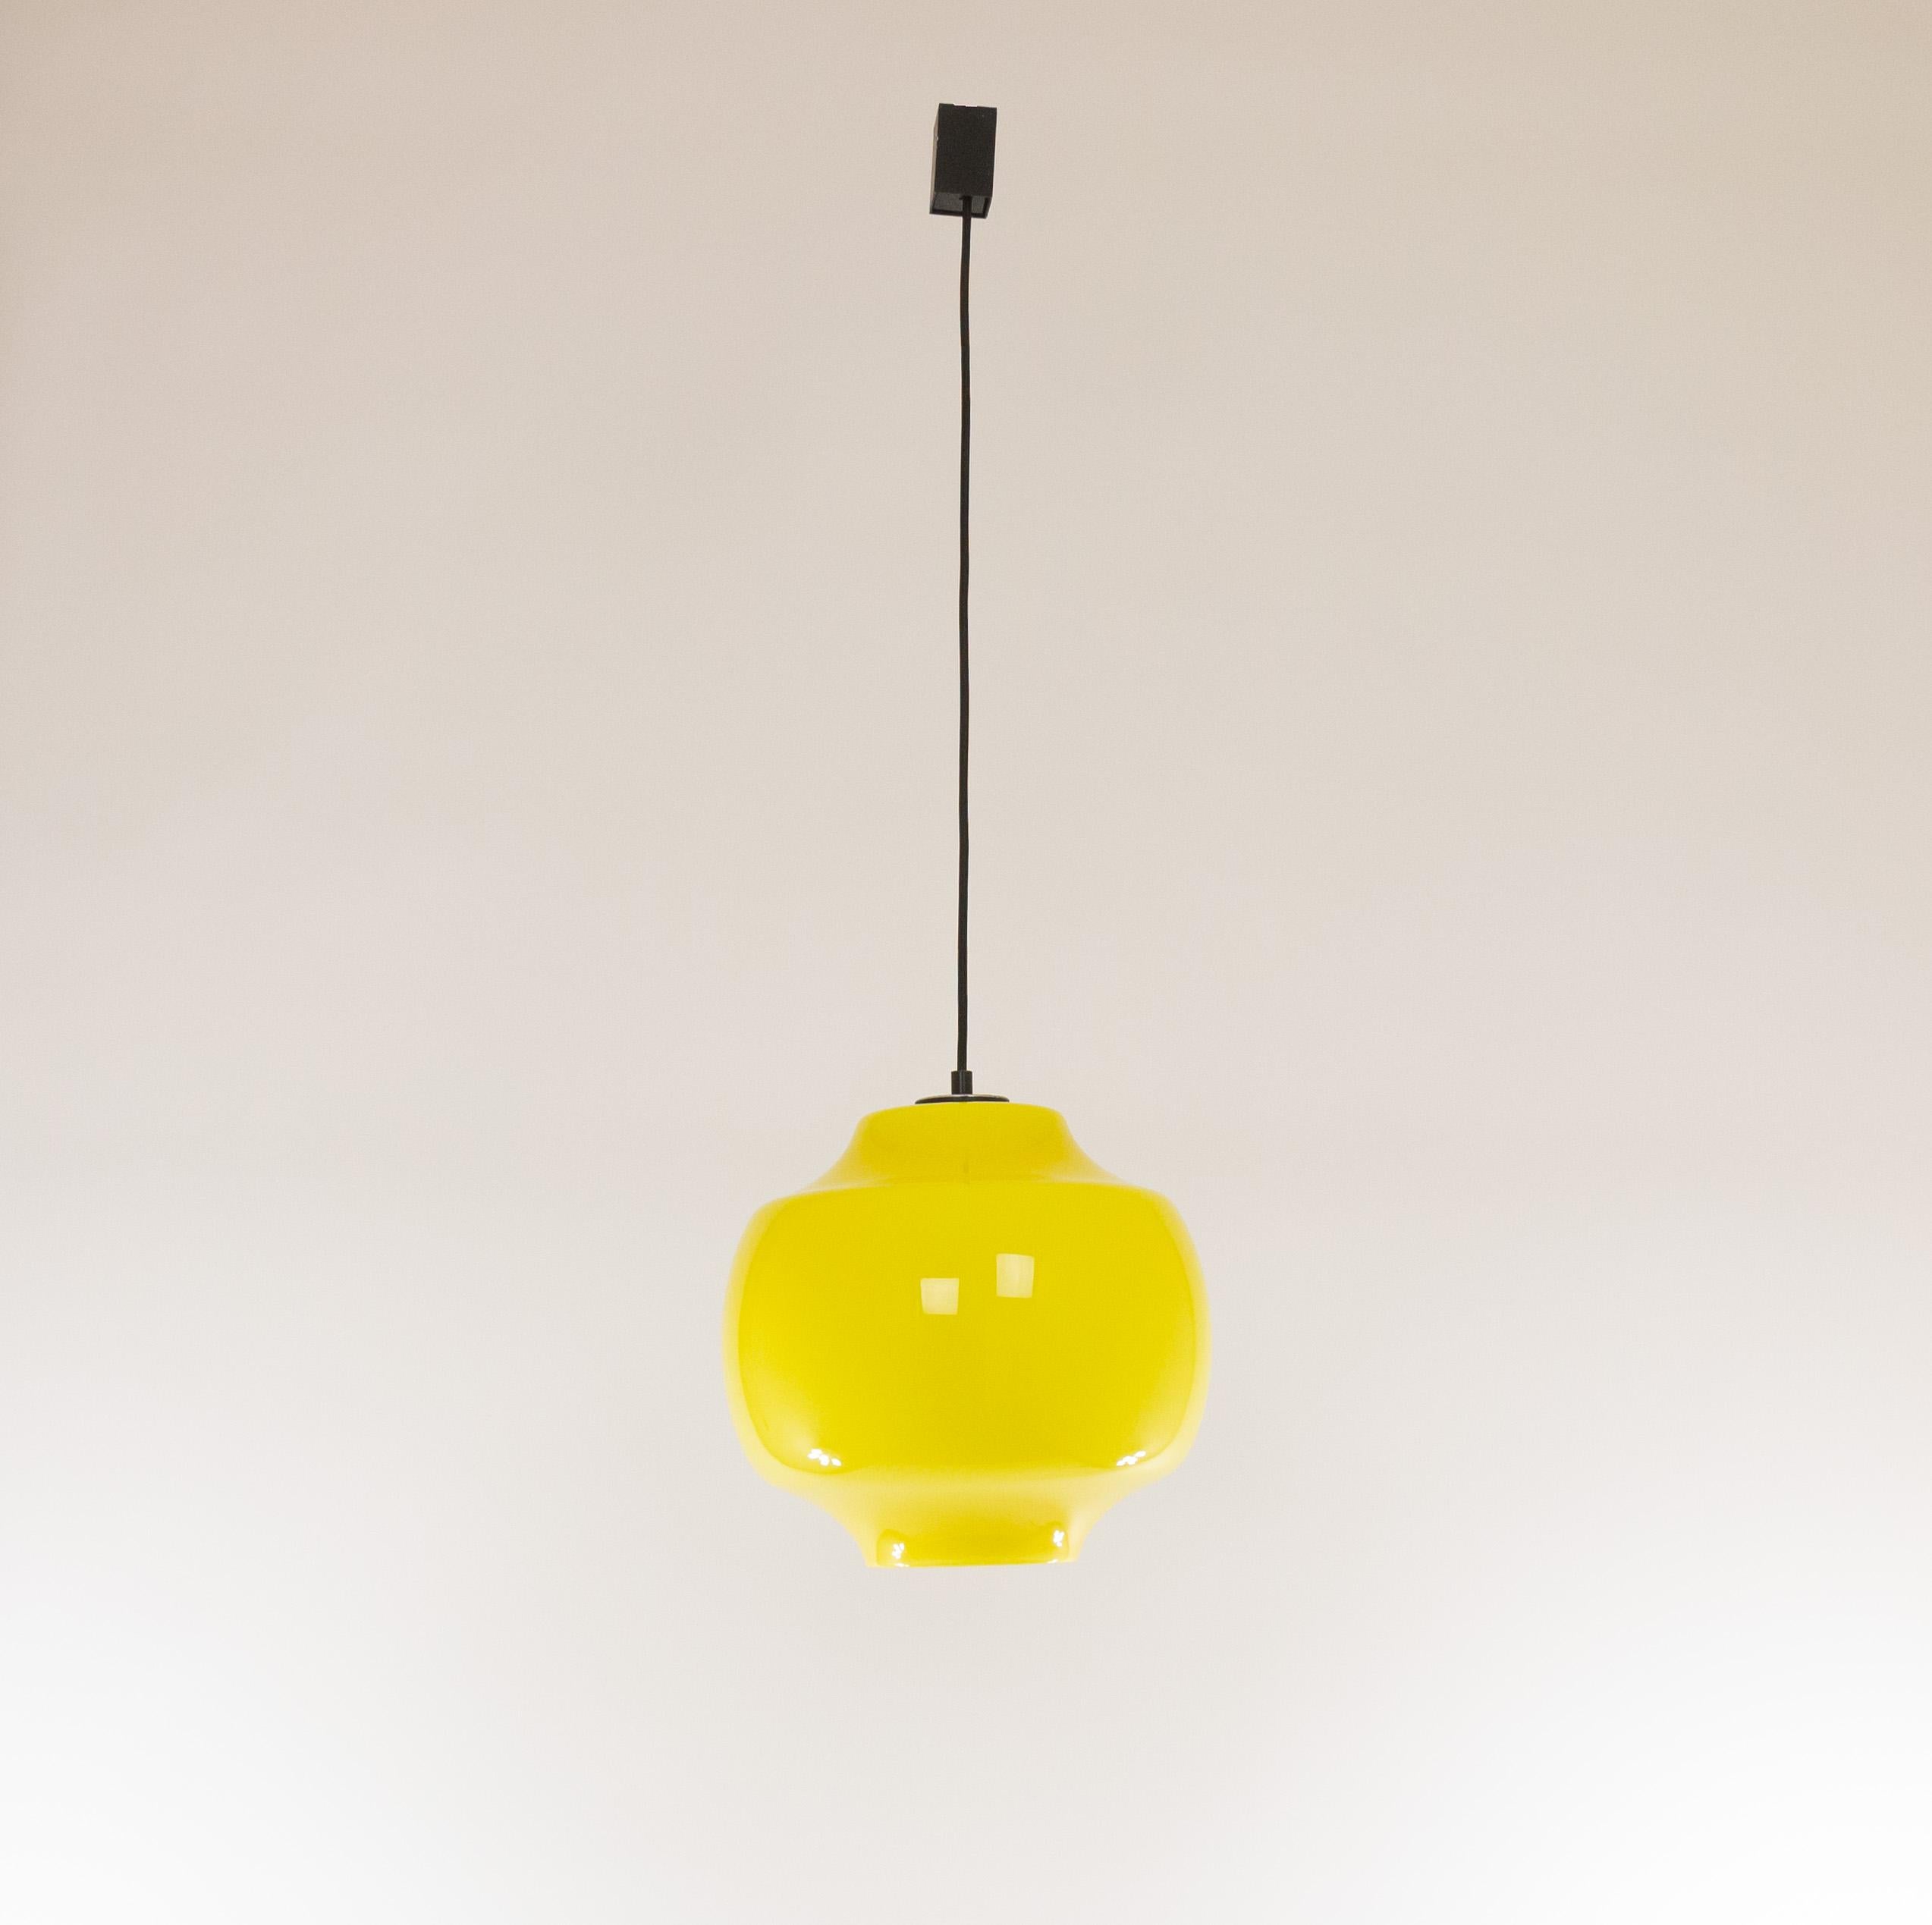 Yellow Model L 63 glass pendant designed in the 1960s by Alessandro Pianon for Venetian glassmaker Vistosi.

The glass is subtle and still in beautiful vintage condition. The metal ceiling cap is original. 

The lamp has been rewired with 2 m